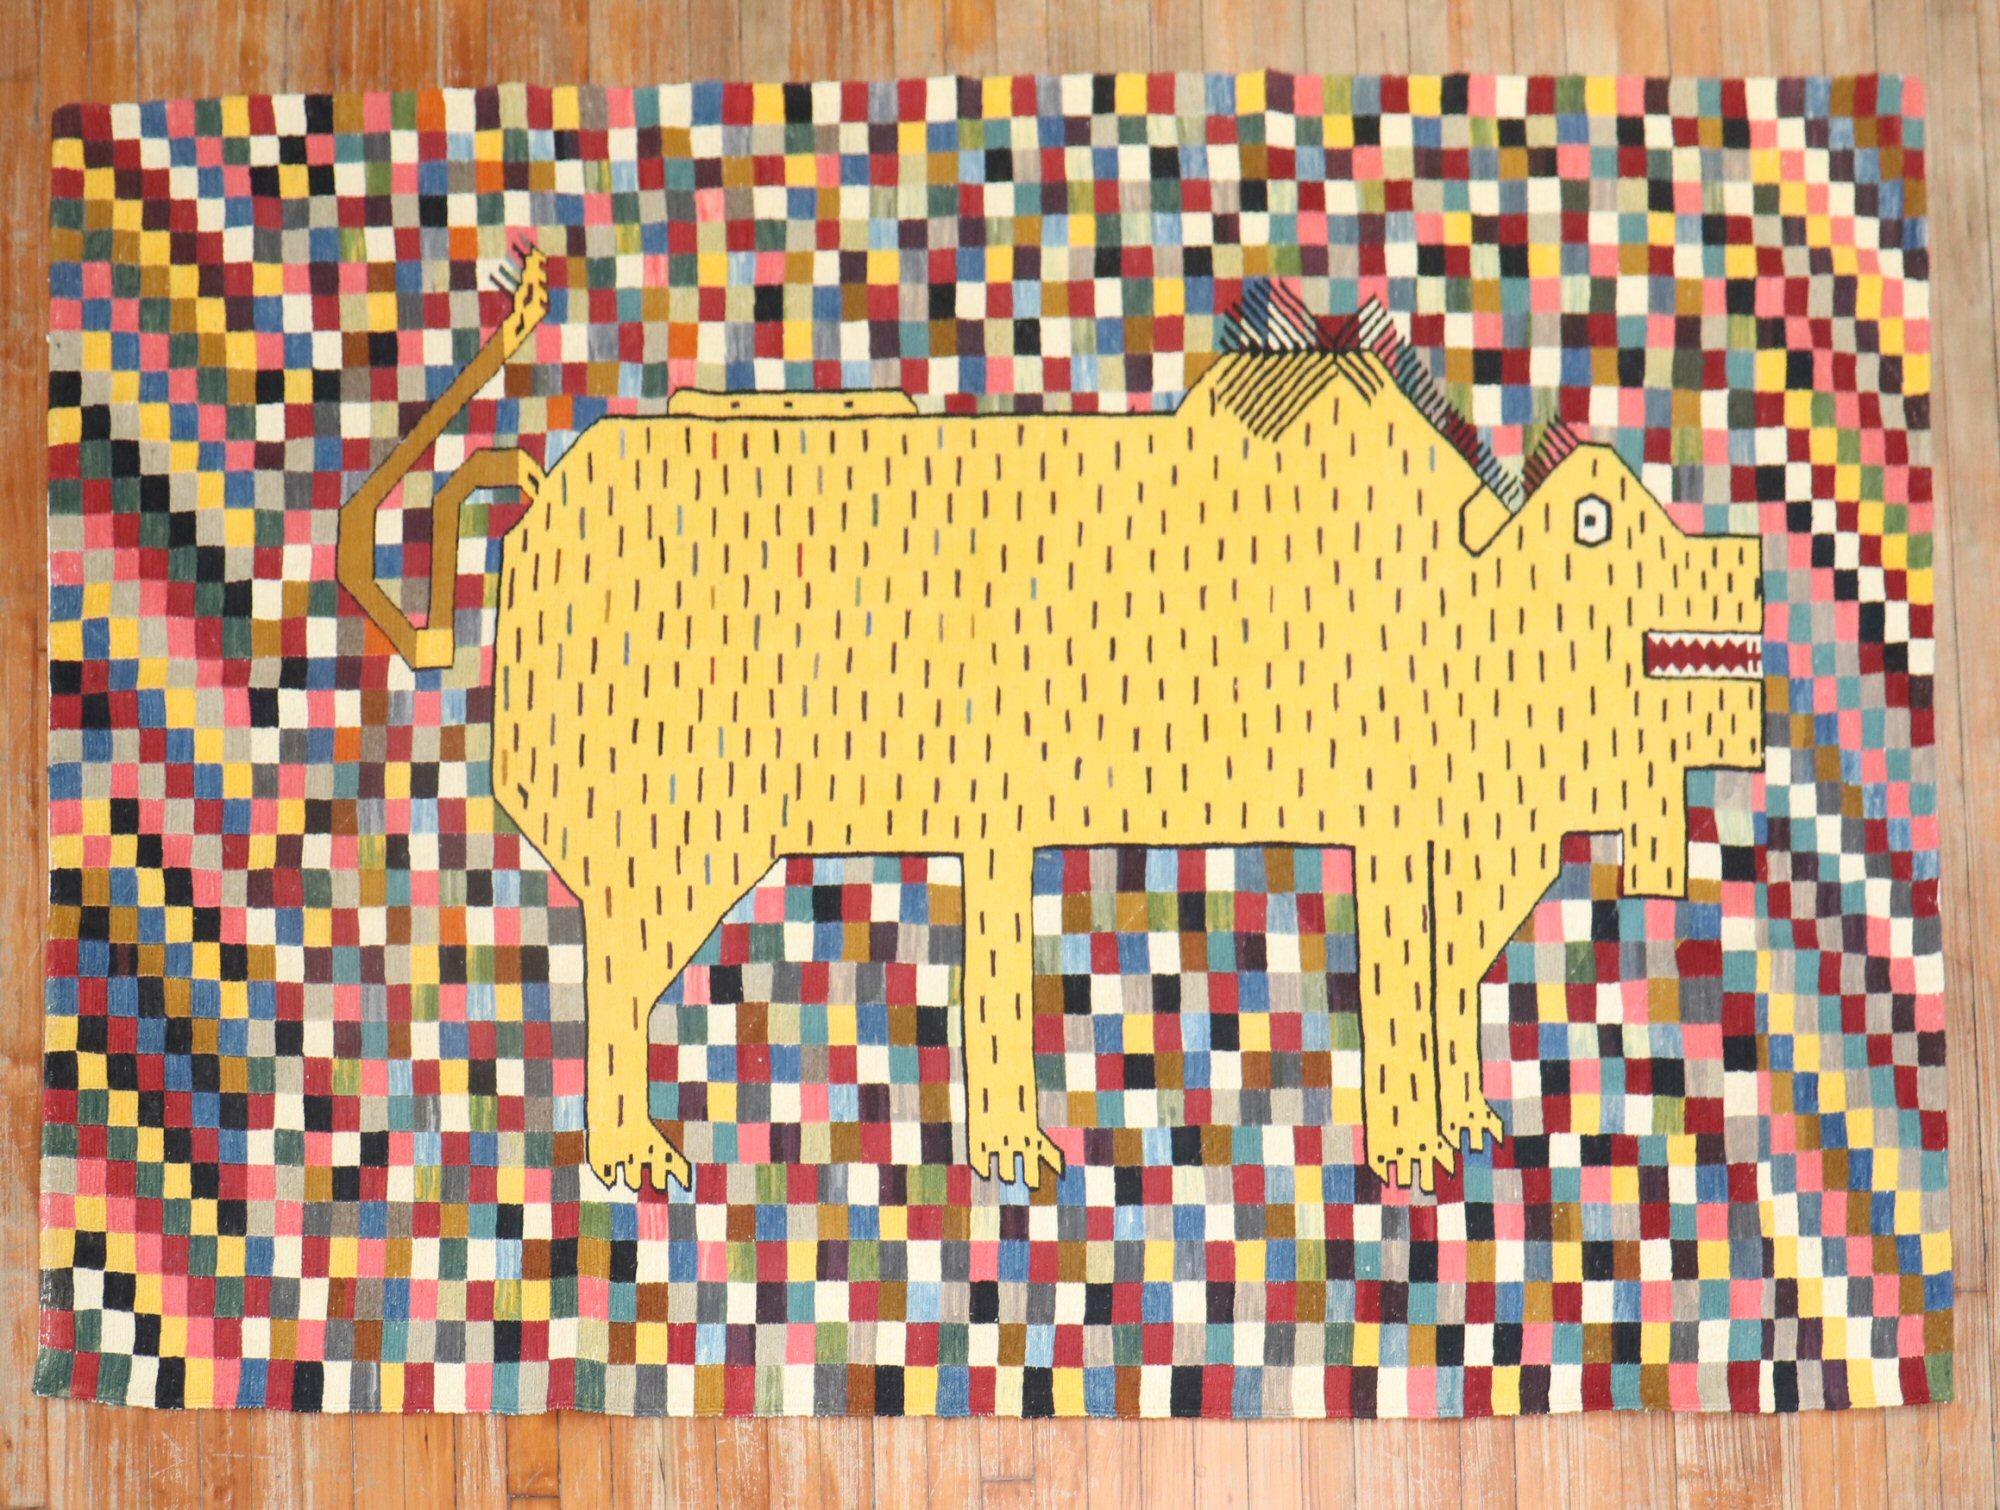 Late 20th Century Persian Kilim with a yellow rhinoceros on a colorful checkered field.

Measures: 4'11'' x 6'11''.